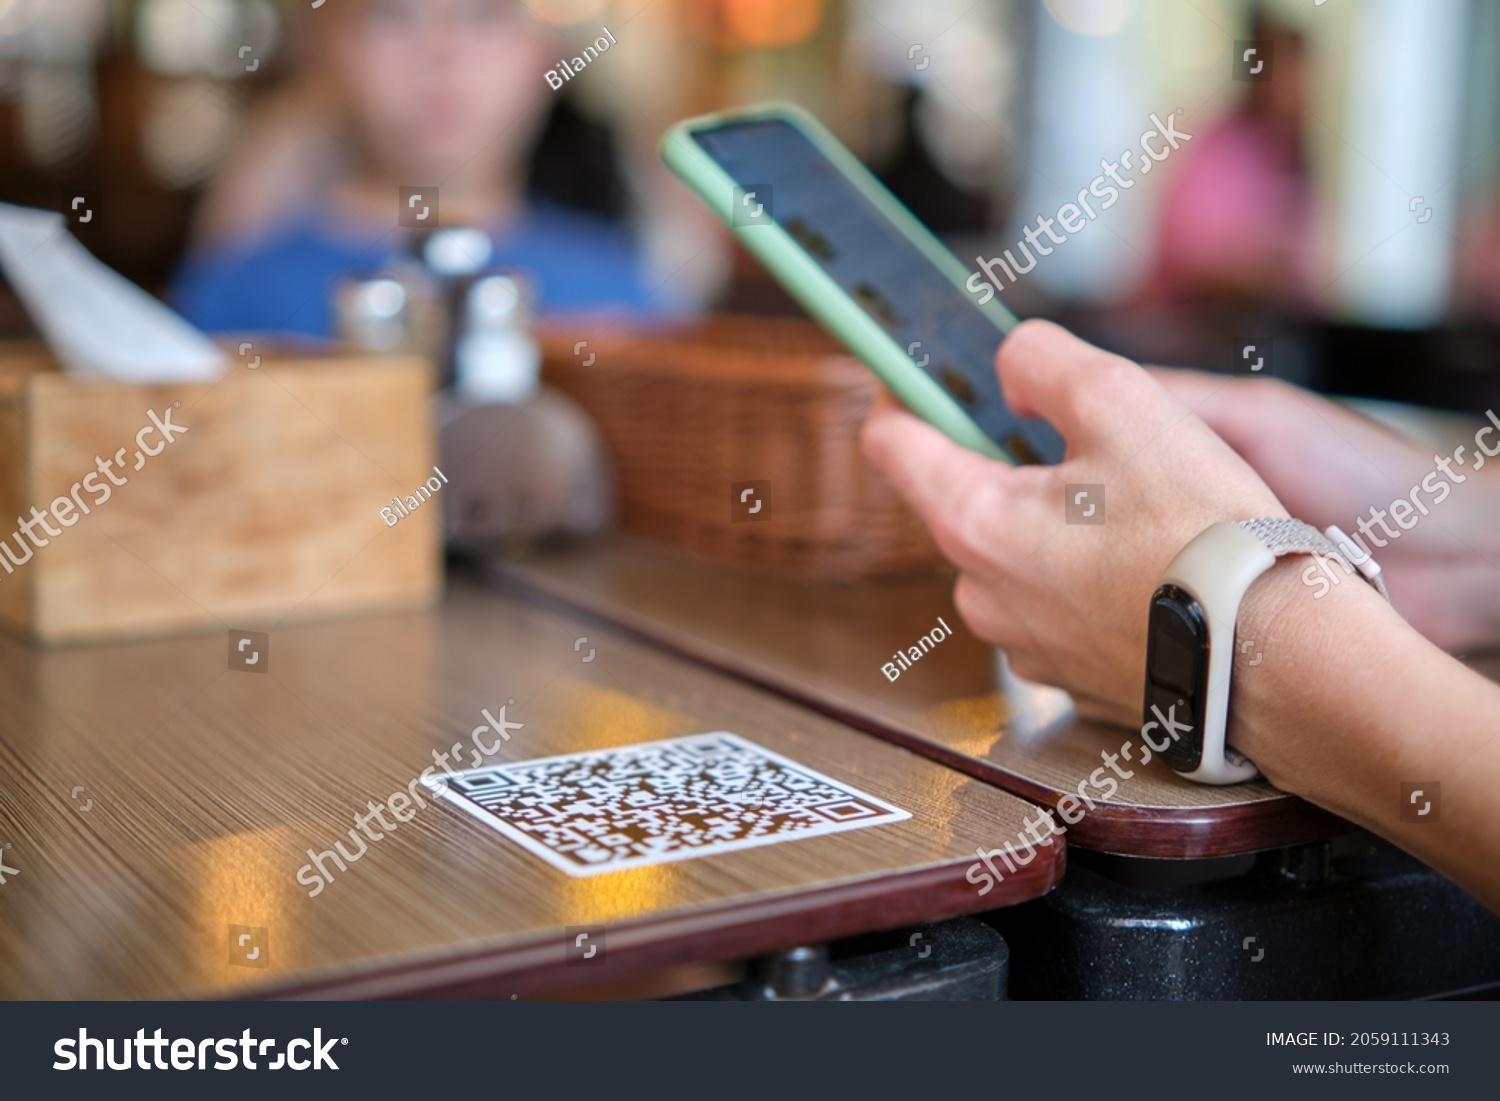 Closeup of guest hand ordering meal in restaurant while scanning qr code with mobile phone for online menu. #2059111343